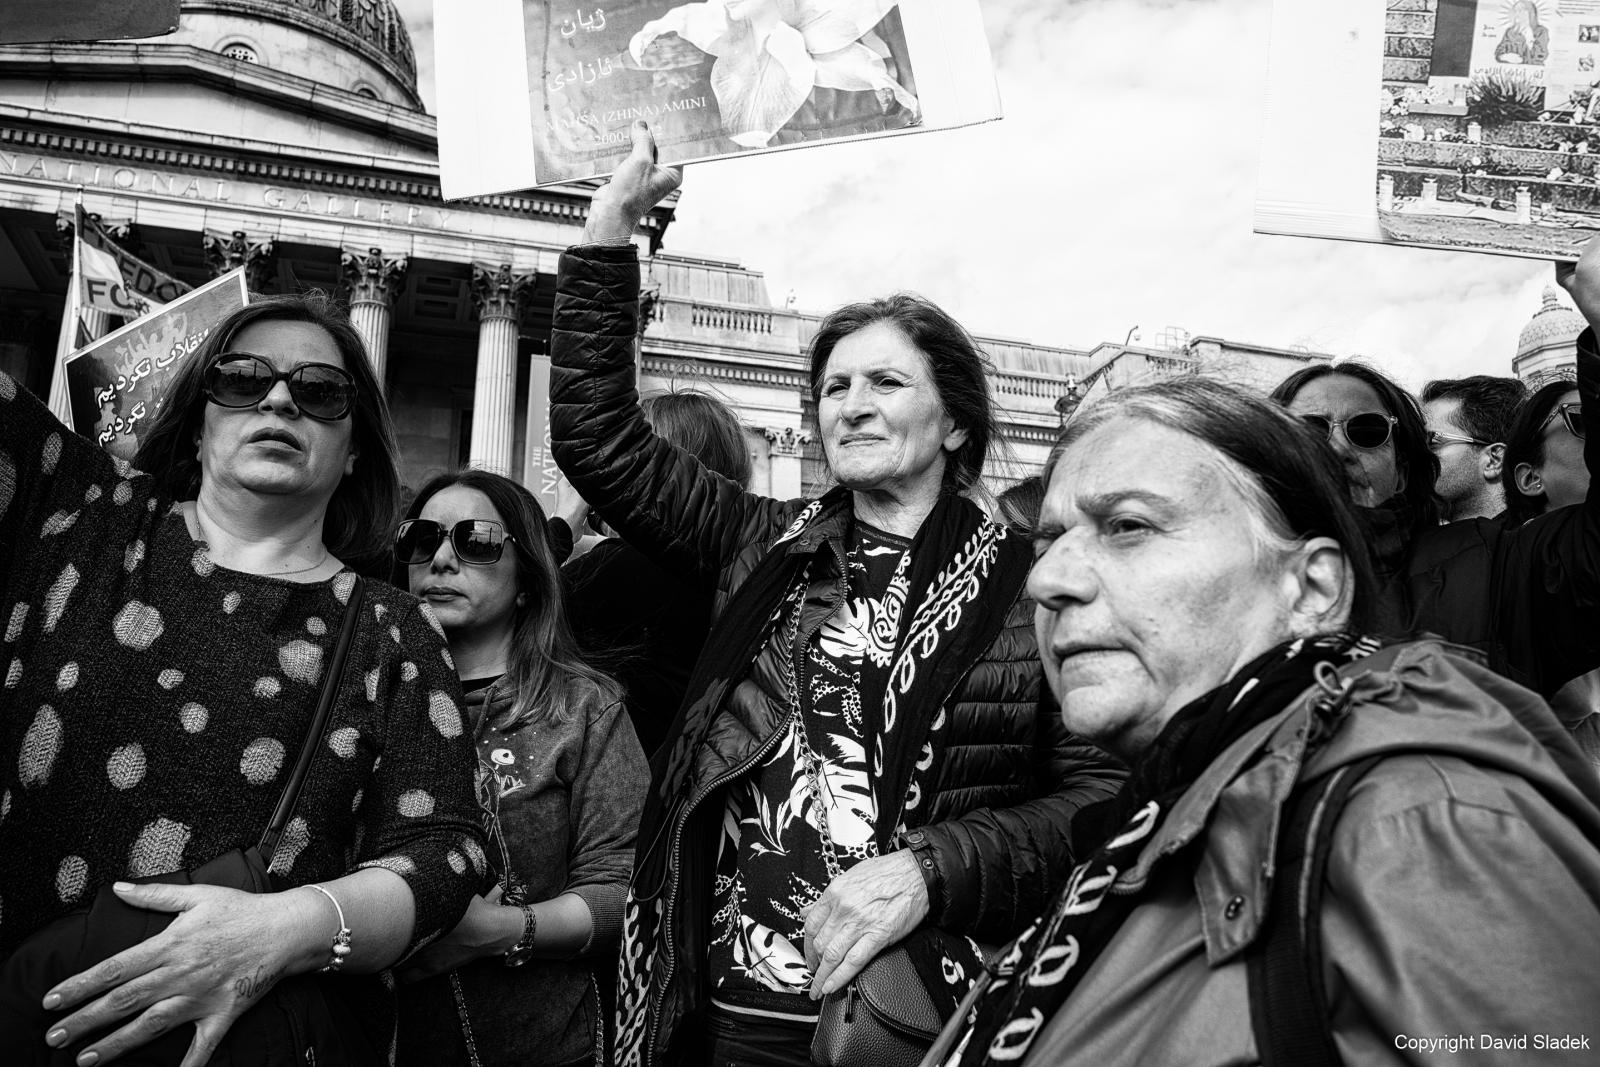 From Justice for Mahsa Amini protest, London, 01/10/2022